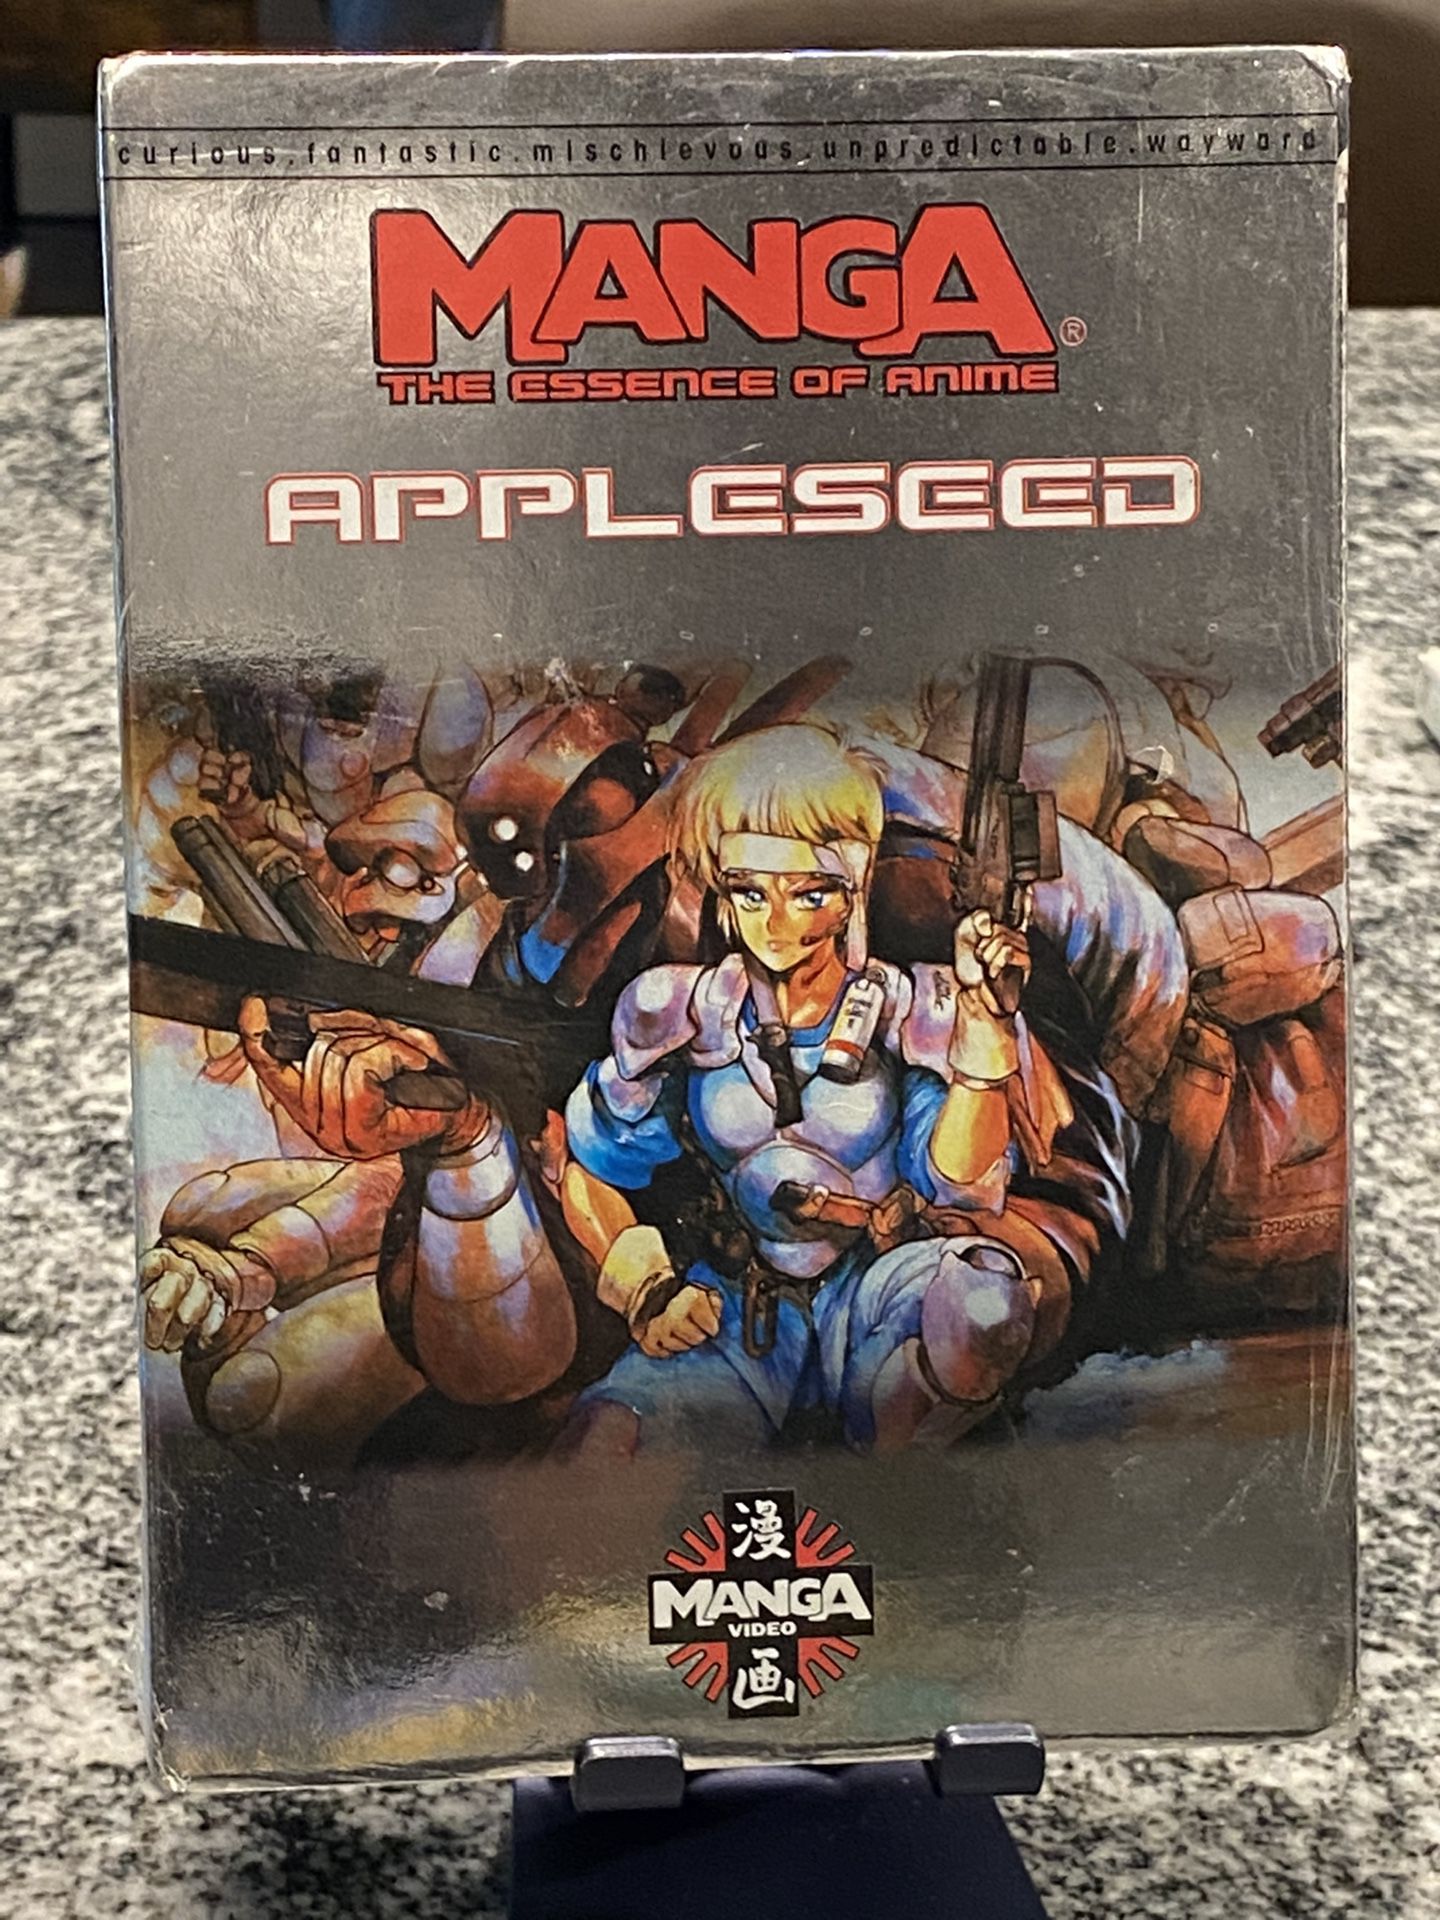 Appleseed Manga The Essence Of Anime. New Sealed 2001. Rare & Hard To Find